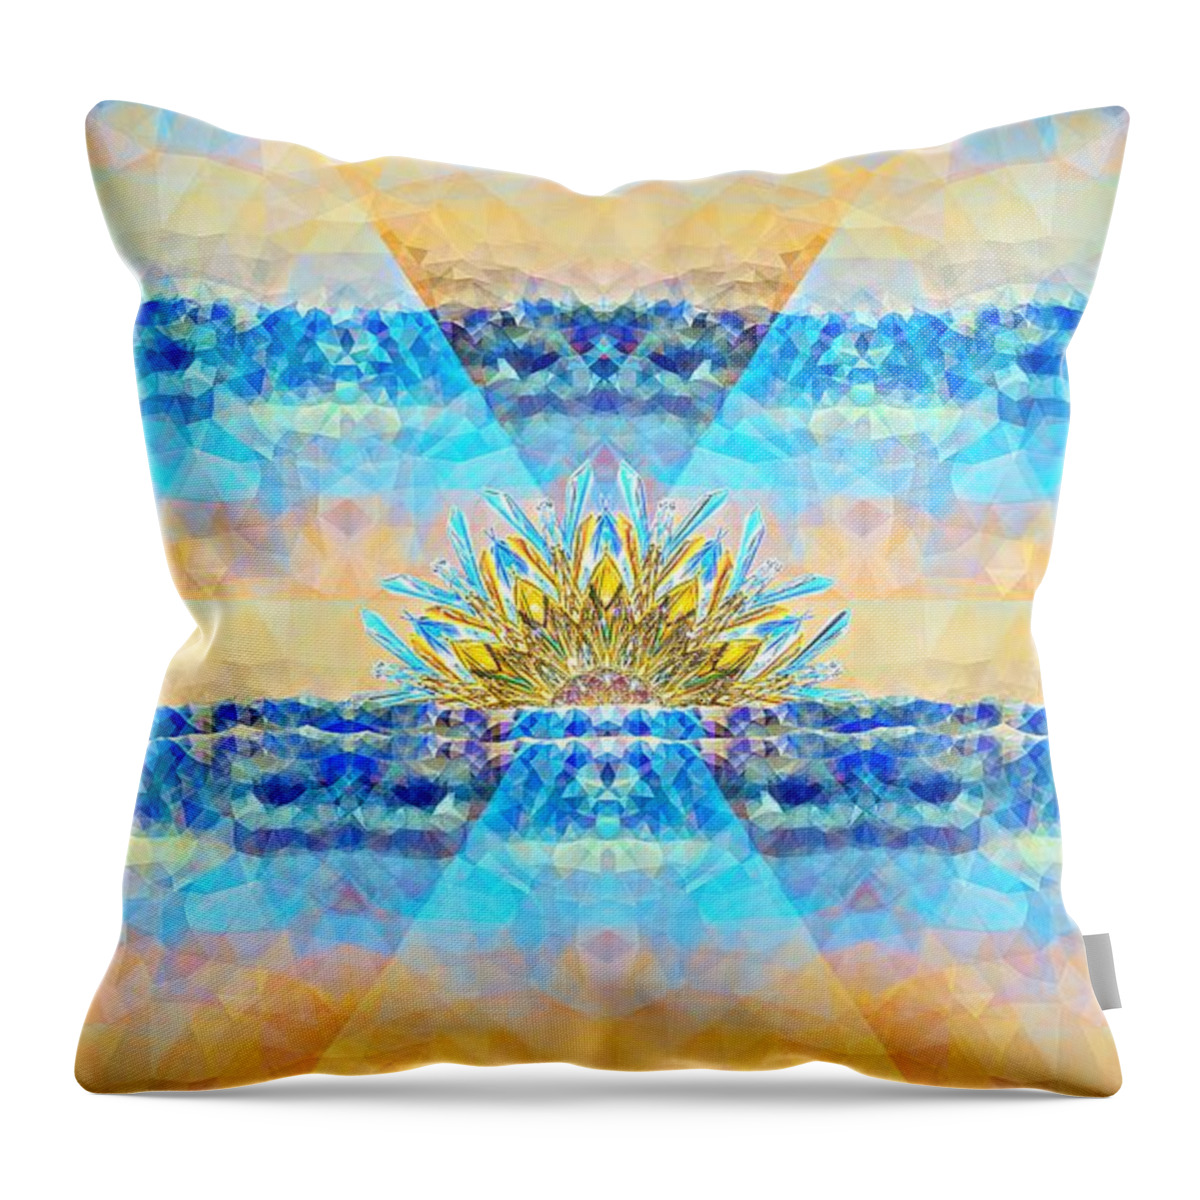 Mirage Throw Pillow featuring the digital art Mirage Sunrise by David Manlove